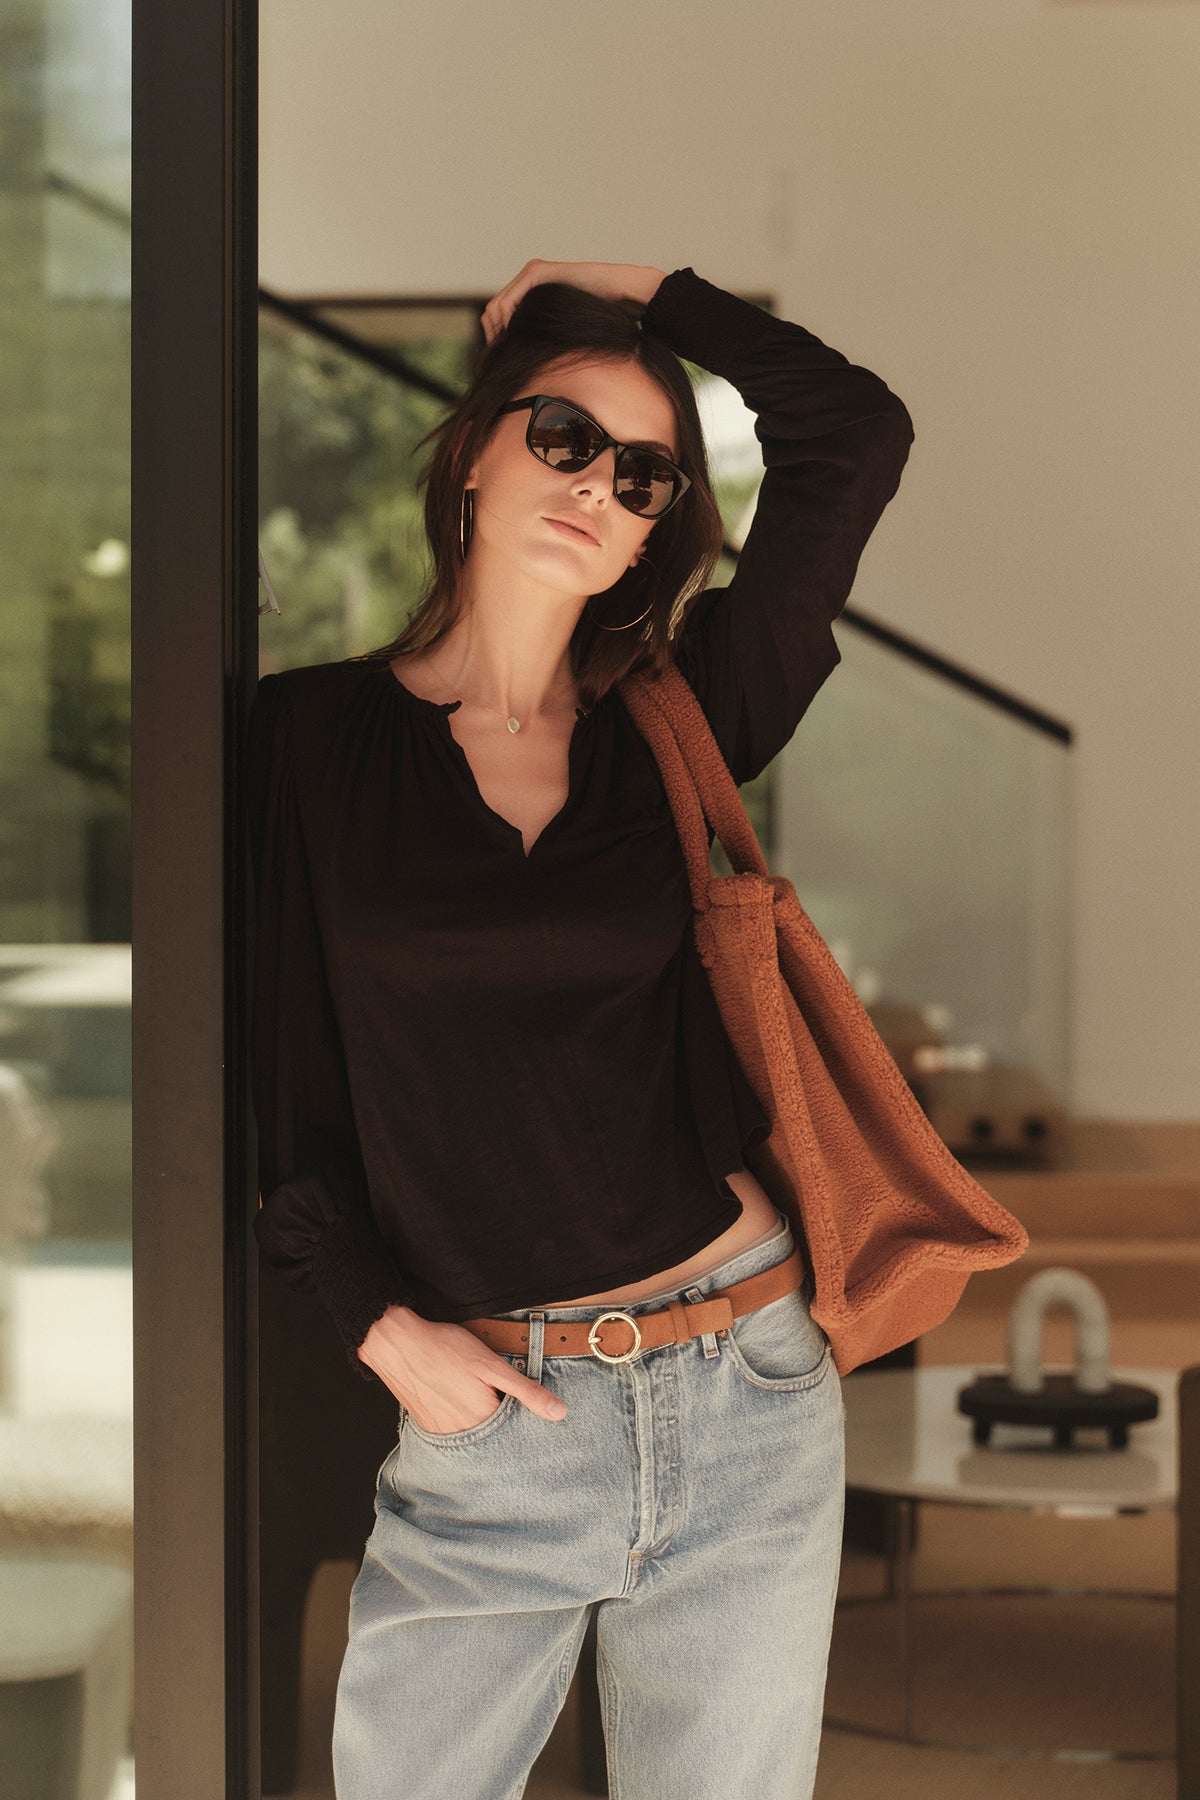 A woman wearing an IRINA SPLIT NECK TEE by Velvet by Graham & Spencer and jeans, and carrying a tan bag.-26883565813953